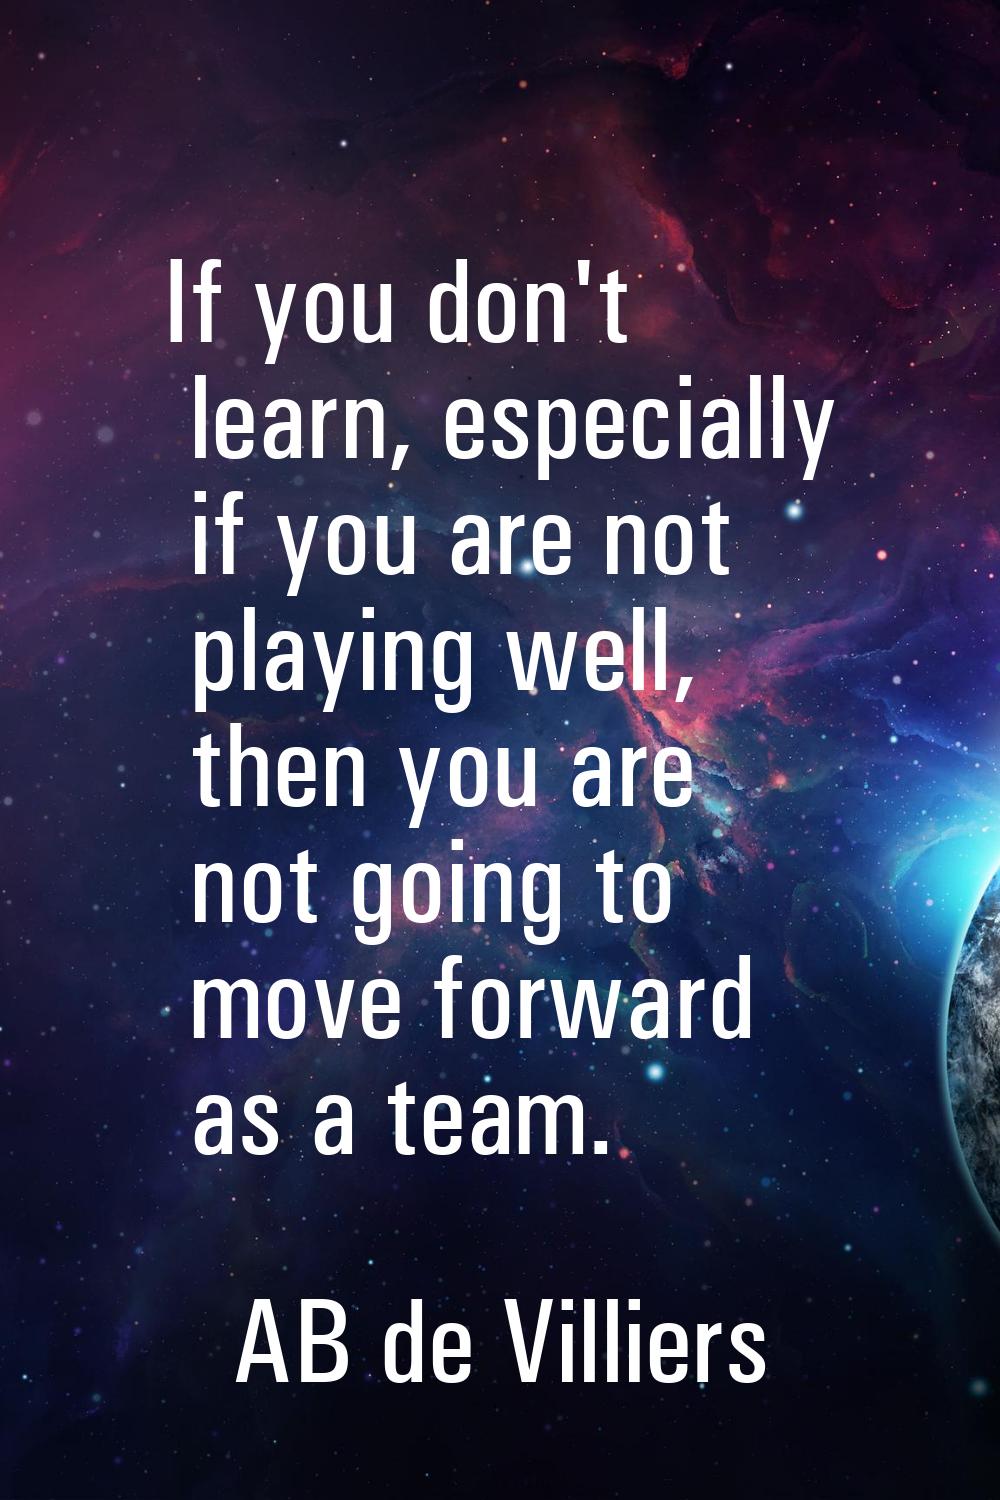 If you don't learn, especially if you are not playing well, then you are not going to move forward 